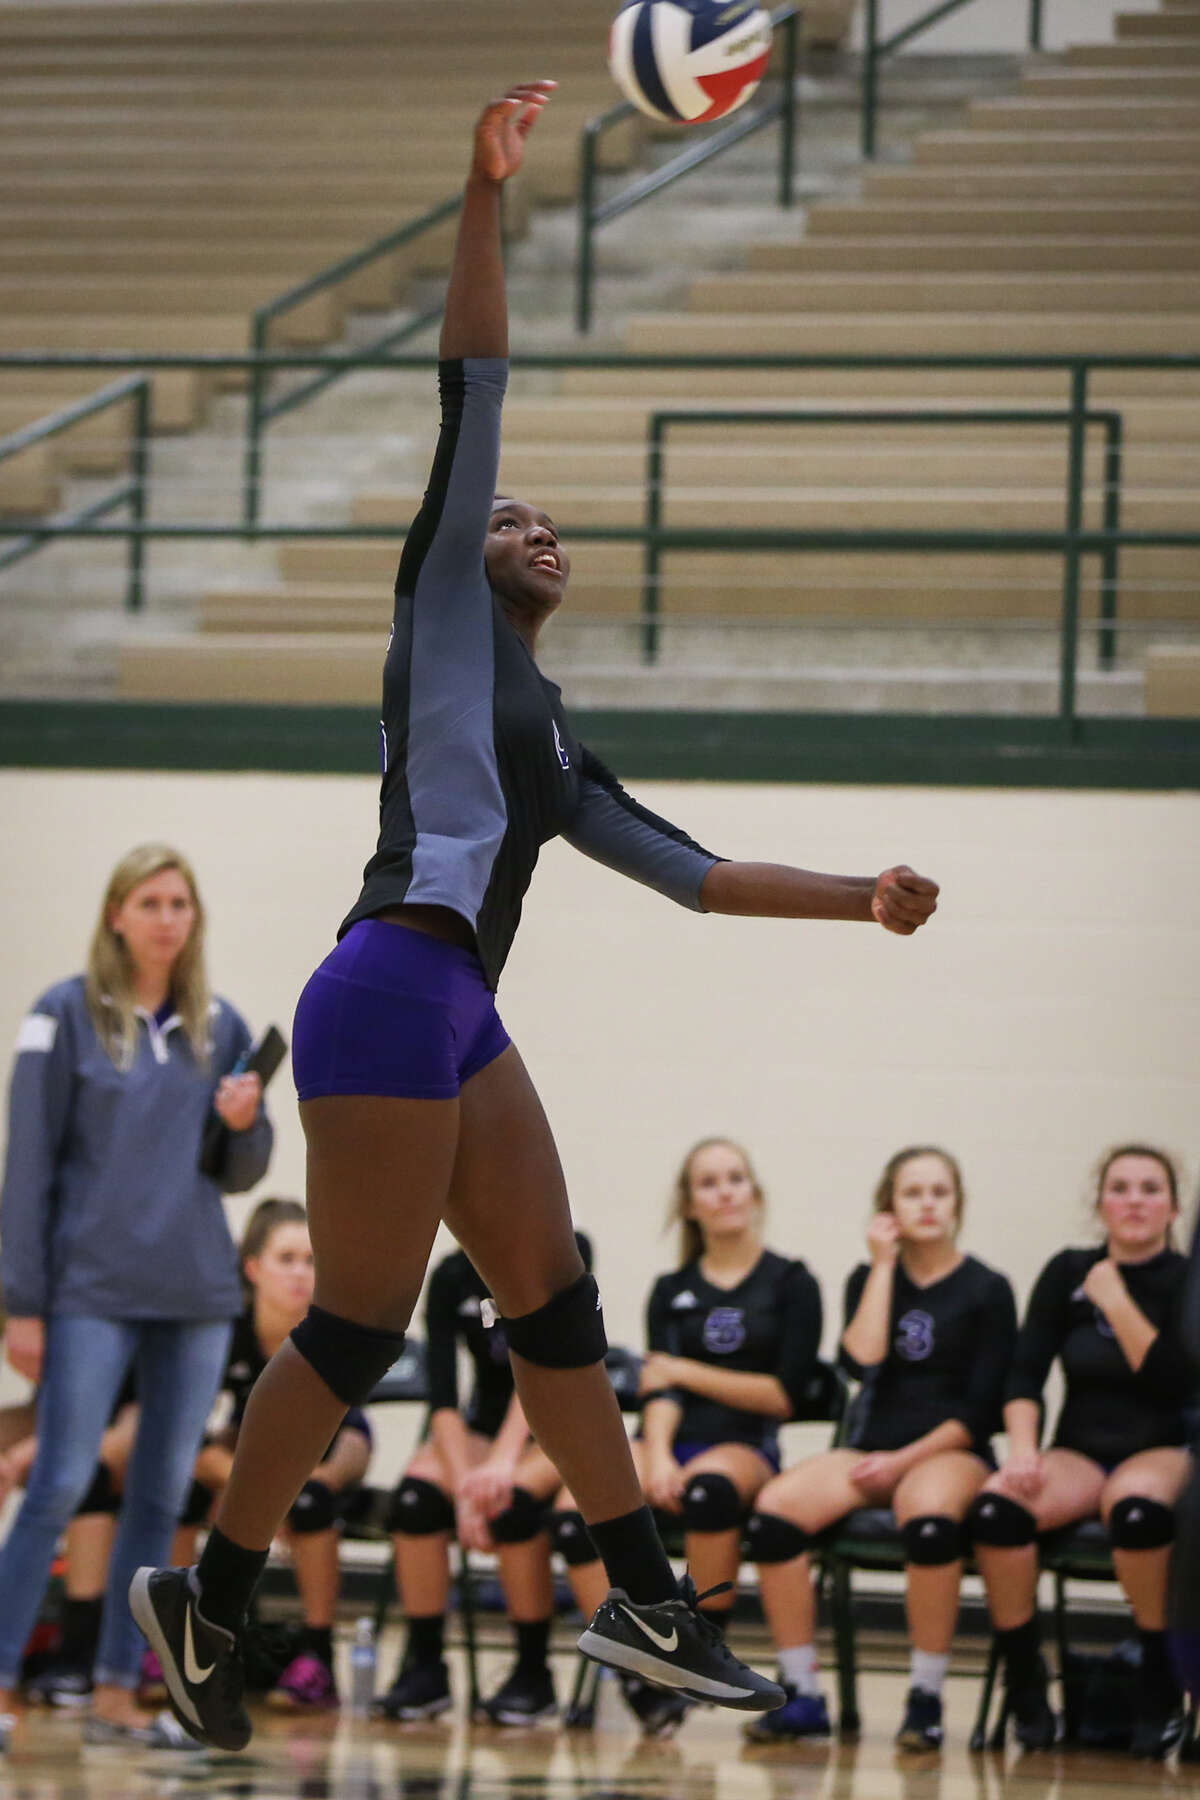 Willis' De'Janae Gilmore (9) hits the ball during the varsity volleyball game against Porter on Saturday, Aug. 12, 2017, at Huntsville High School. (Michael Minasi / Chronicle)